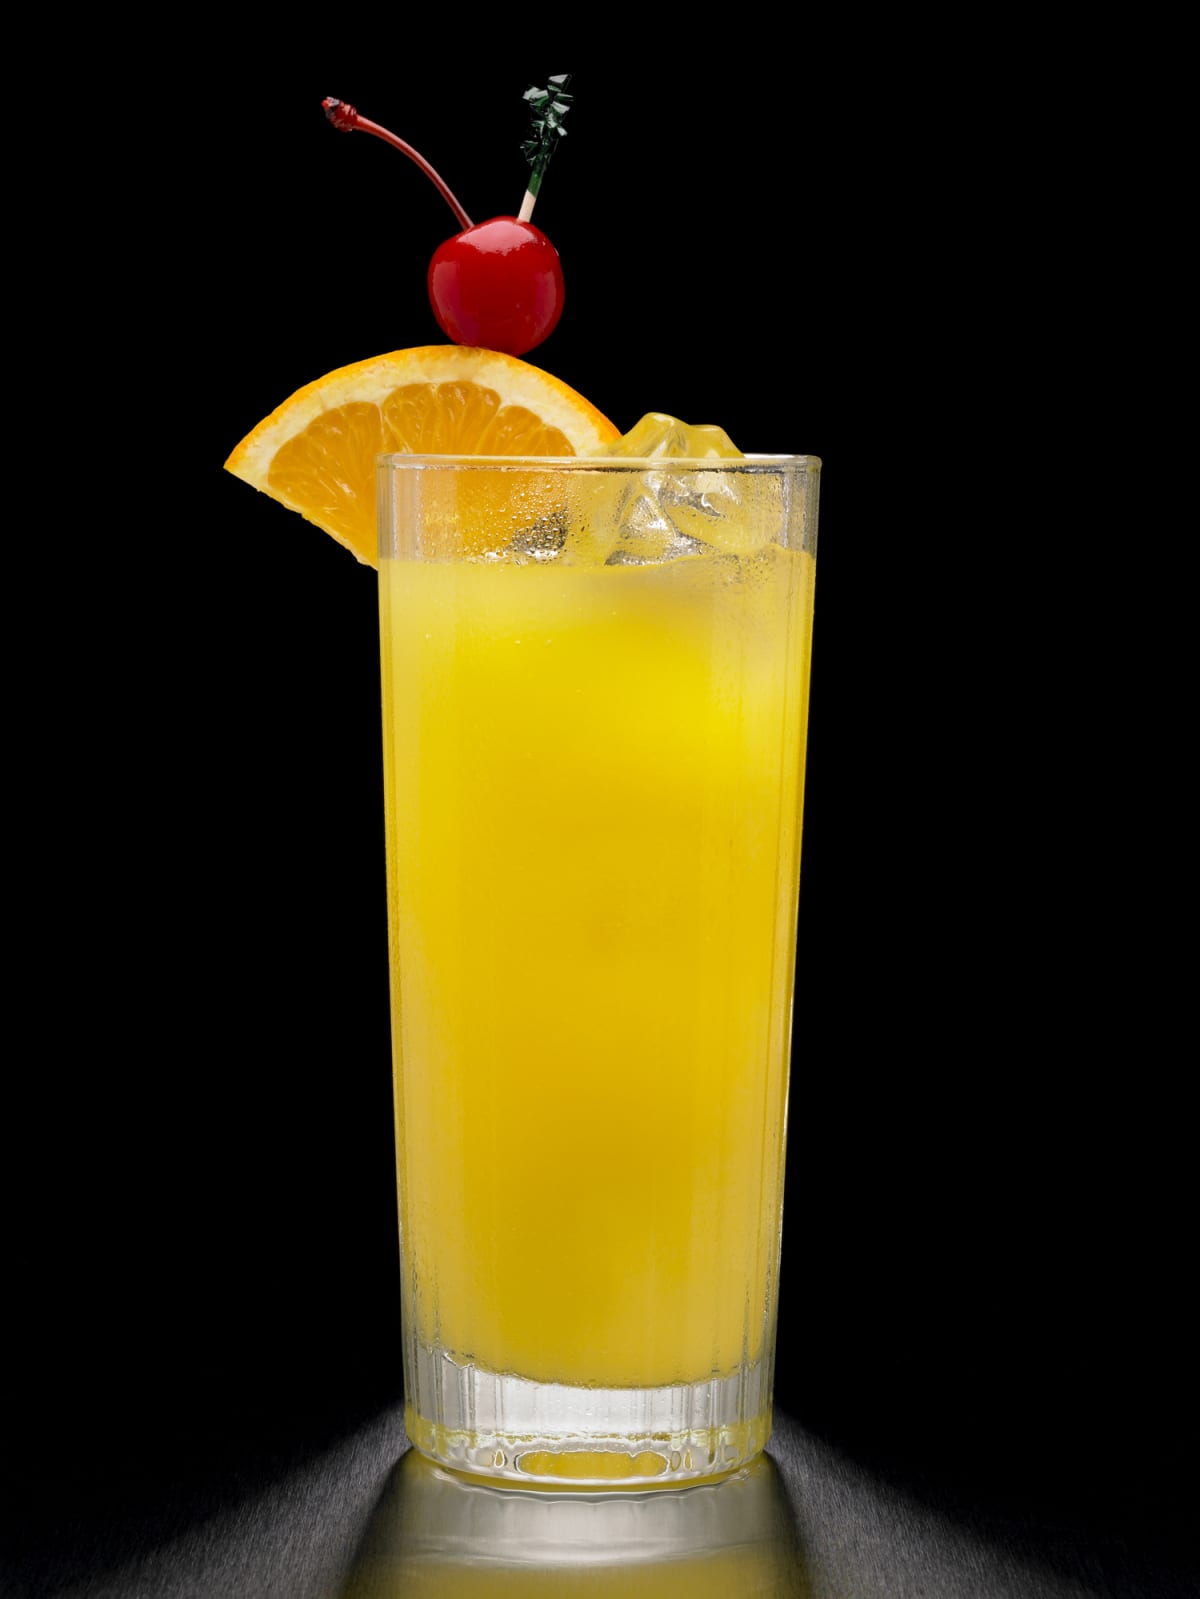 A screwdriver, or Vodka and orange juice cocktail, shot on a black background and garnished with an orange and a cherry.